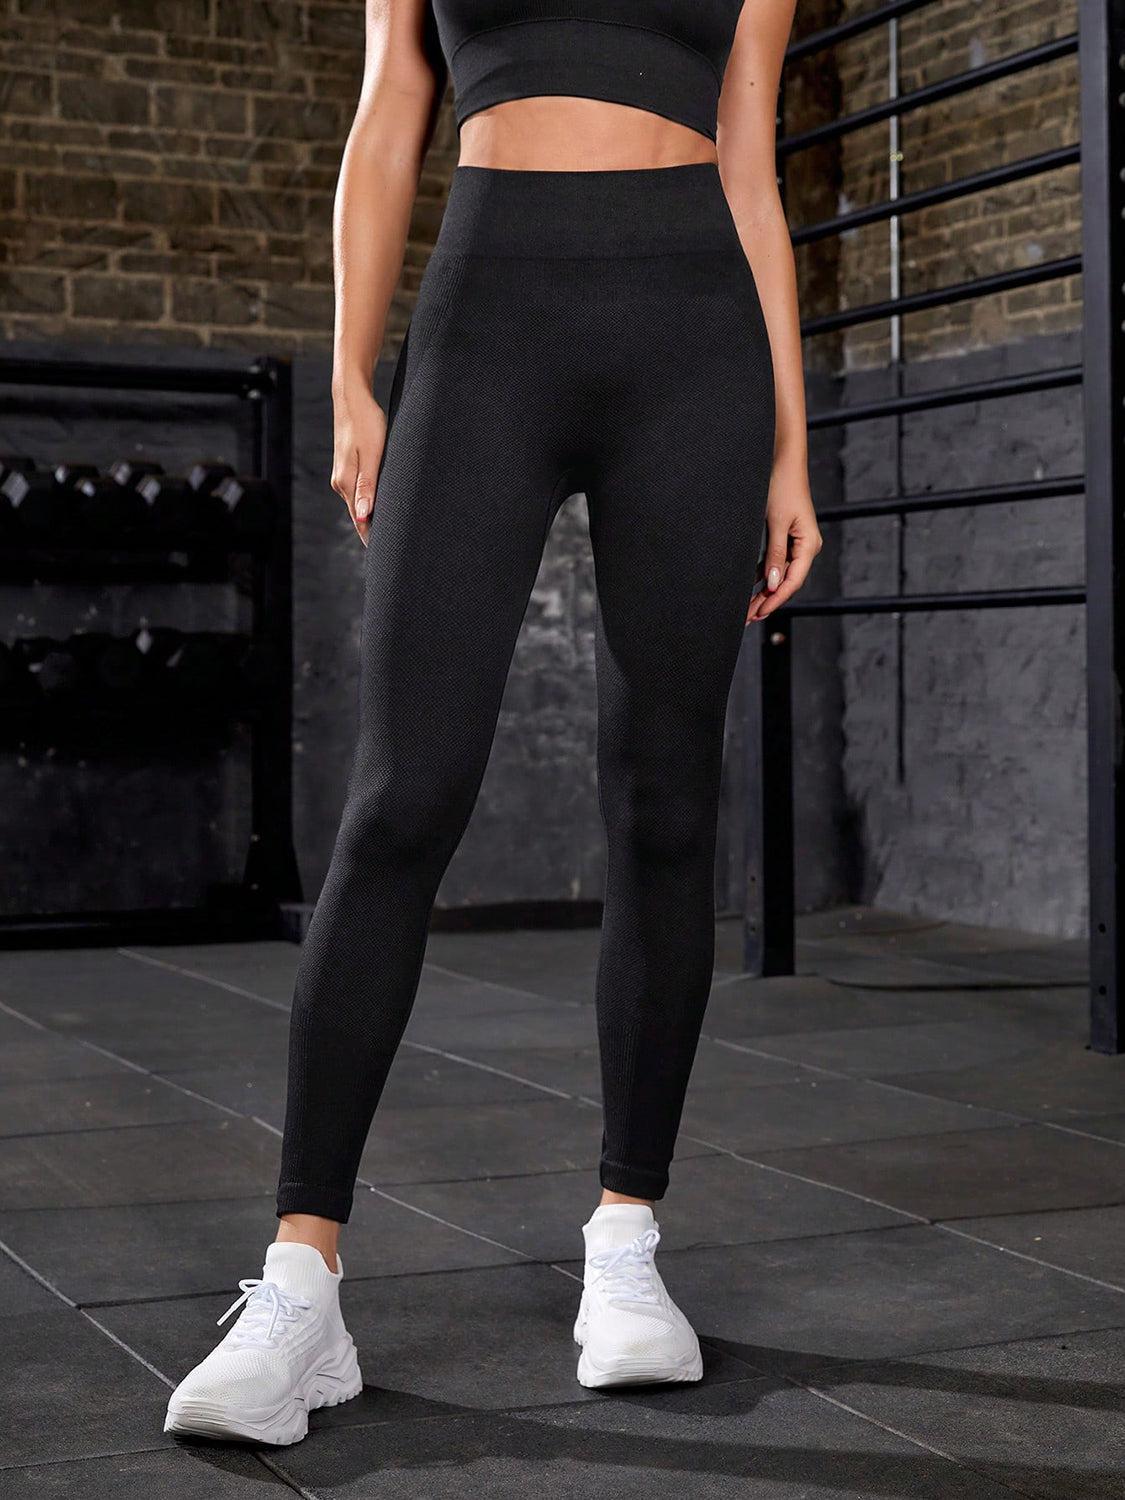 a woman in black sports bra top and leggings